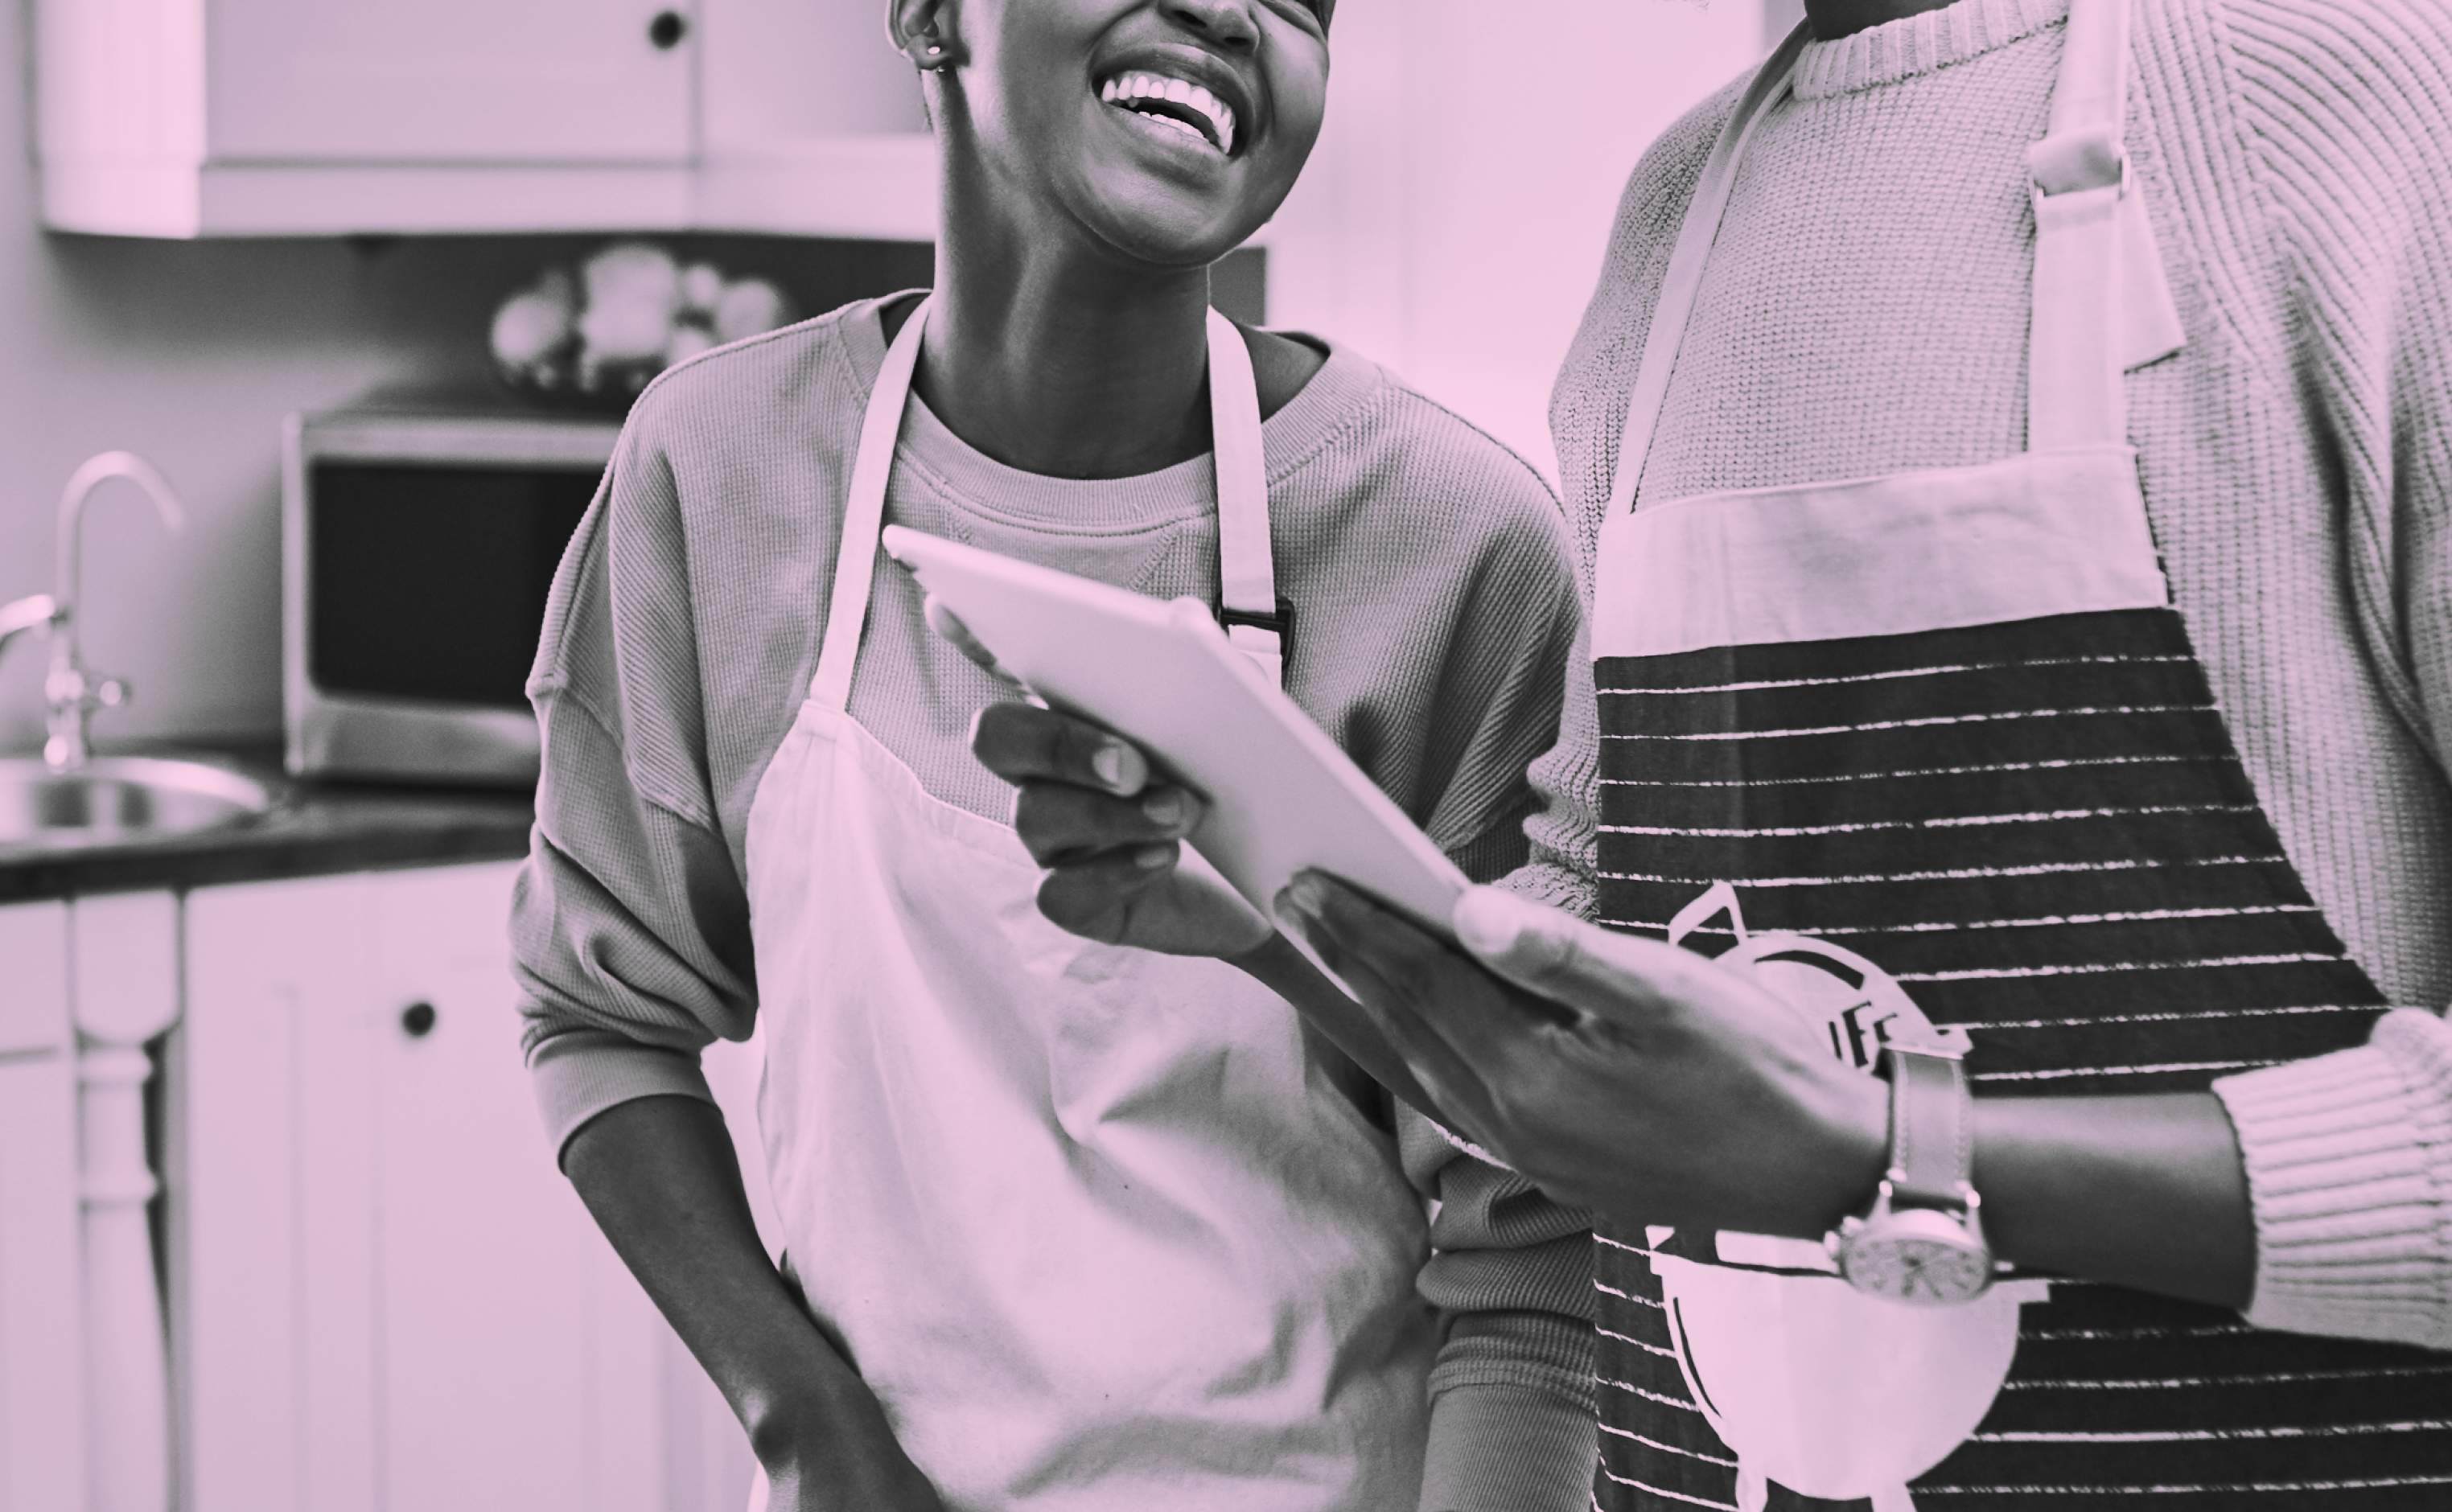 Two people in a kitchen cooking, the woman smiling up at the other individual. Pink overlay on the image